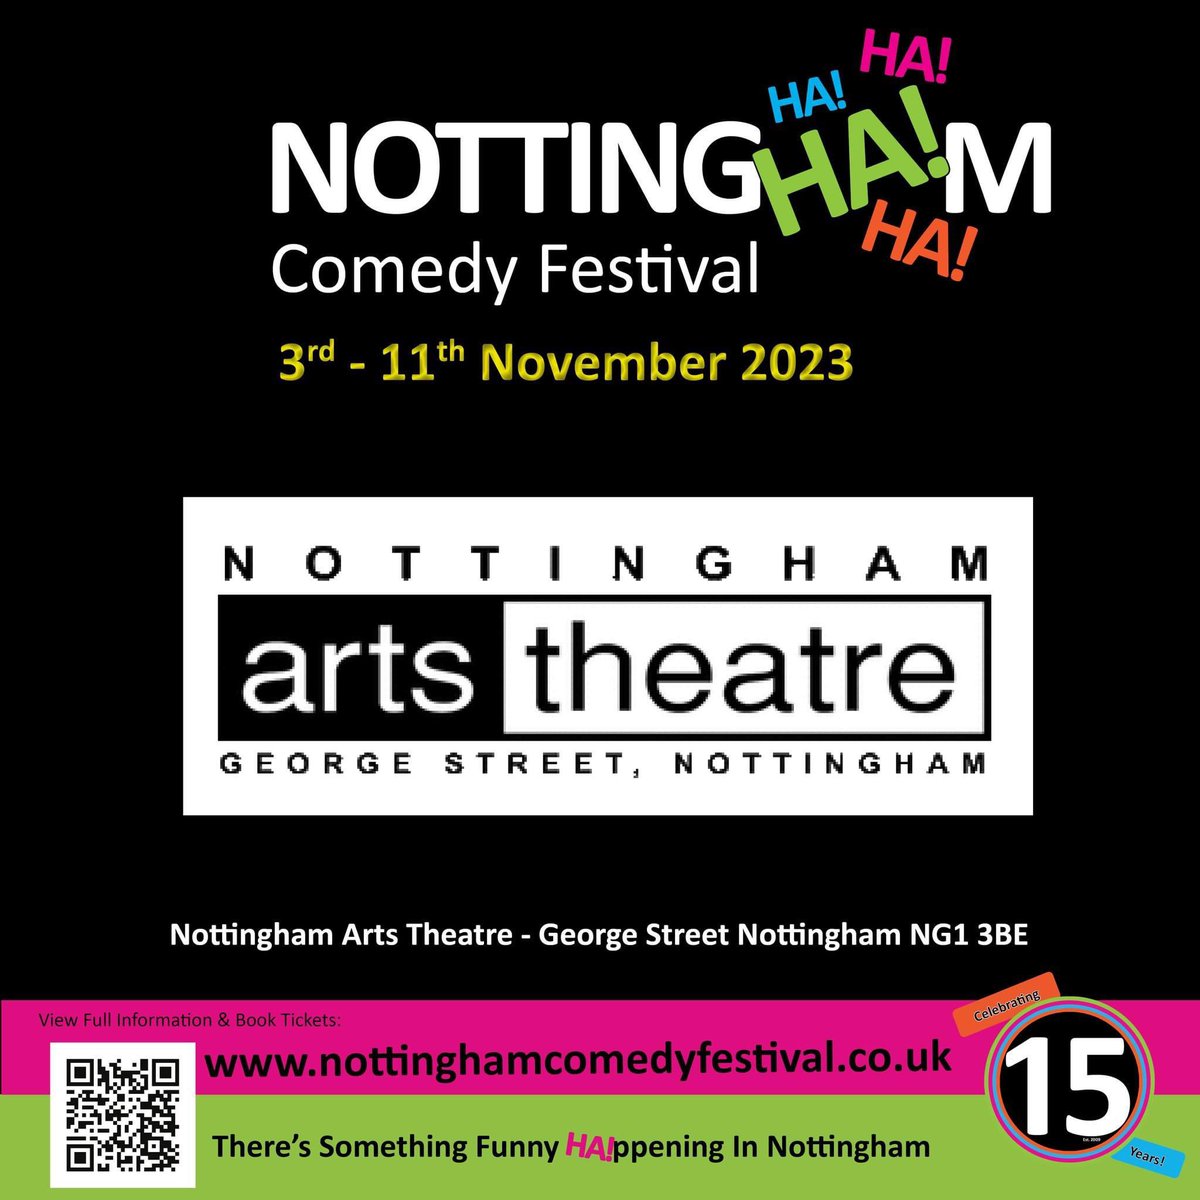 The Nottingham Arts Theatre is one of many venues taking part in this years Nottingham Comedy Festival. Playing host to the fantastic Rhymes Against Humanity. Tickets are available nottinghamcomedyfestival.co.uk